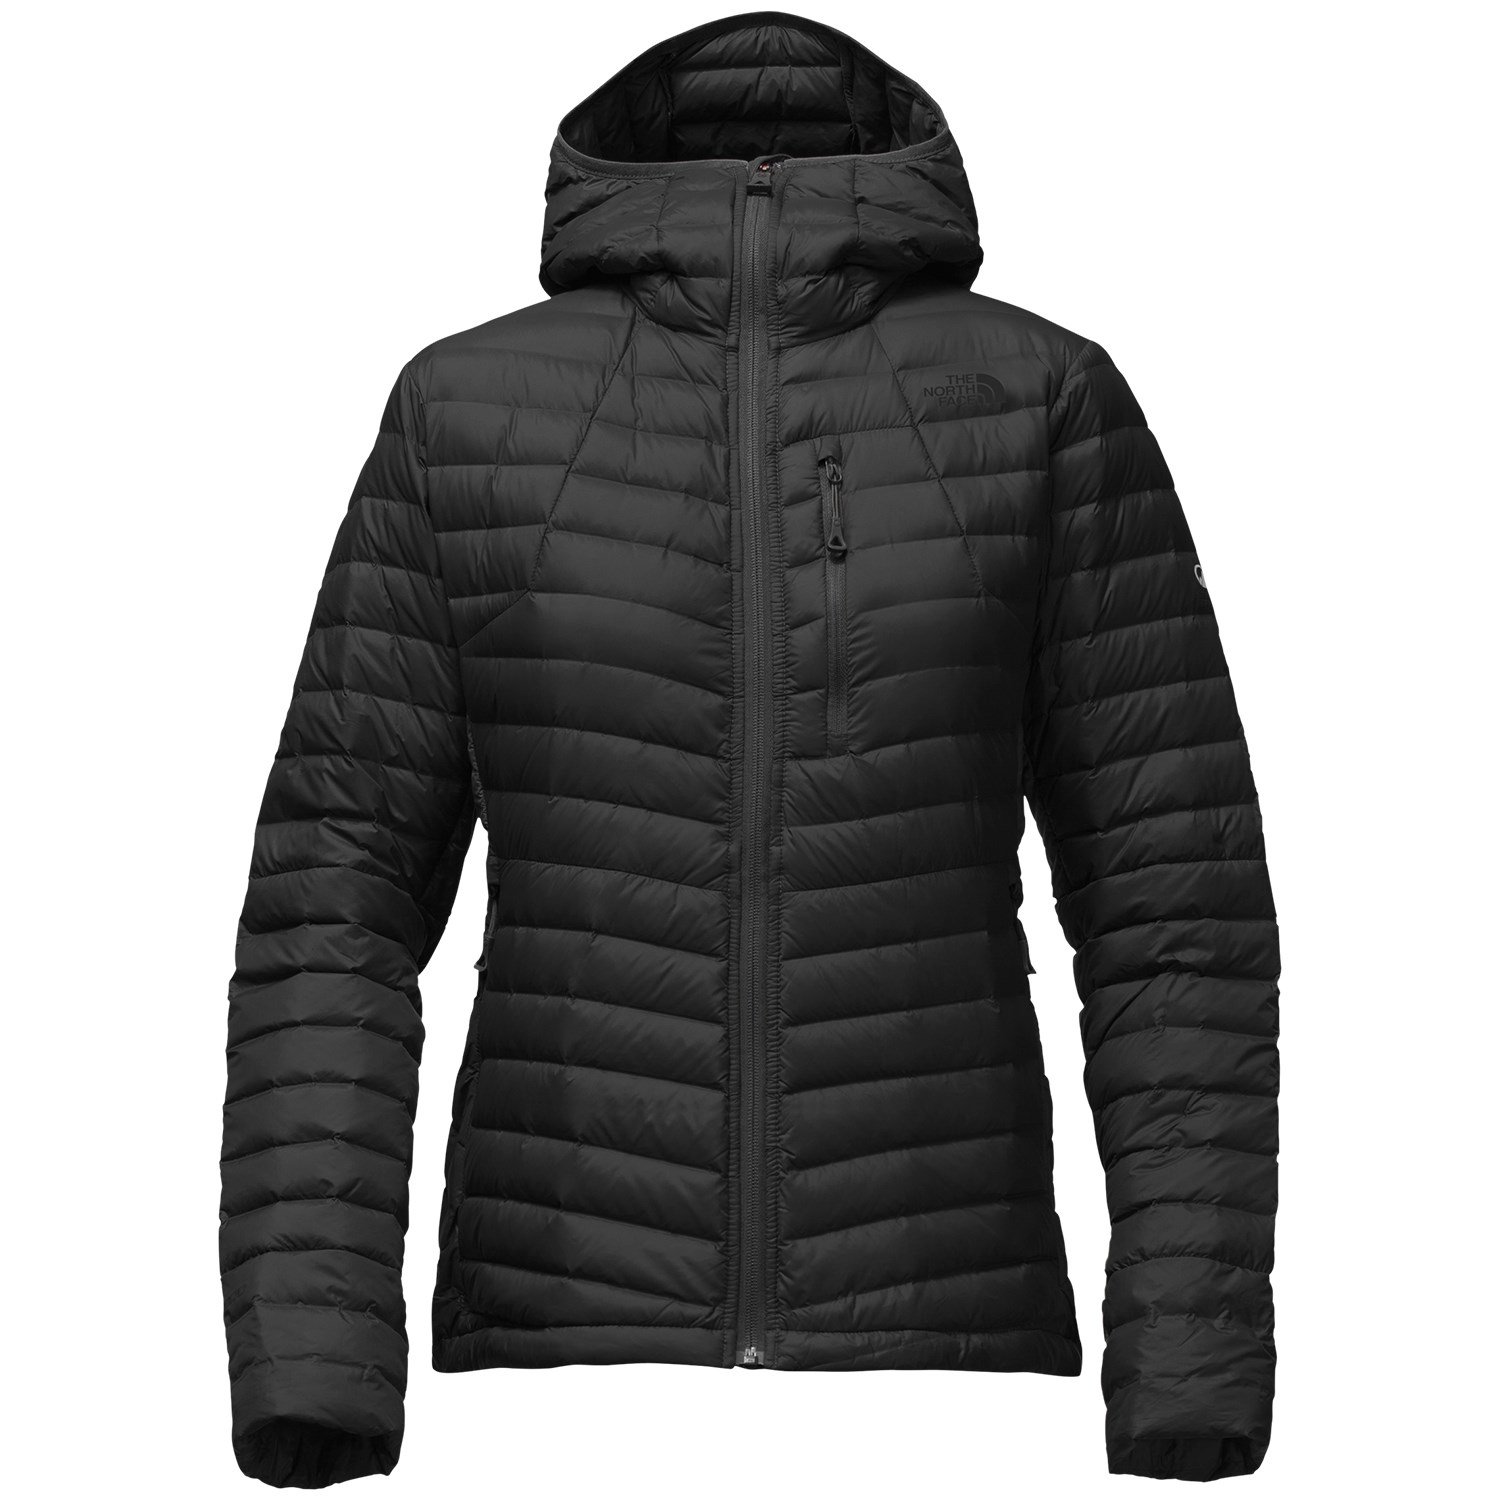 The North Face Premonition Jacket 